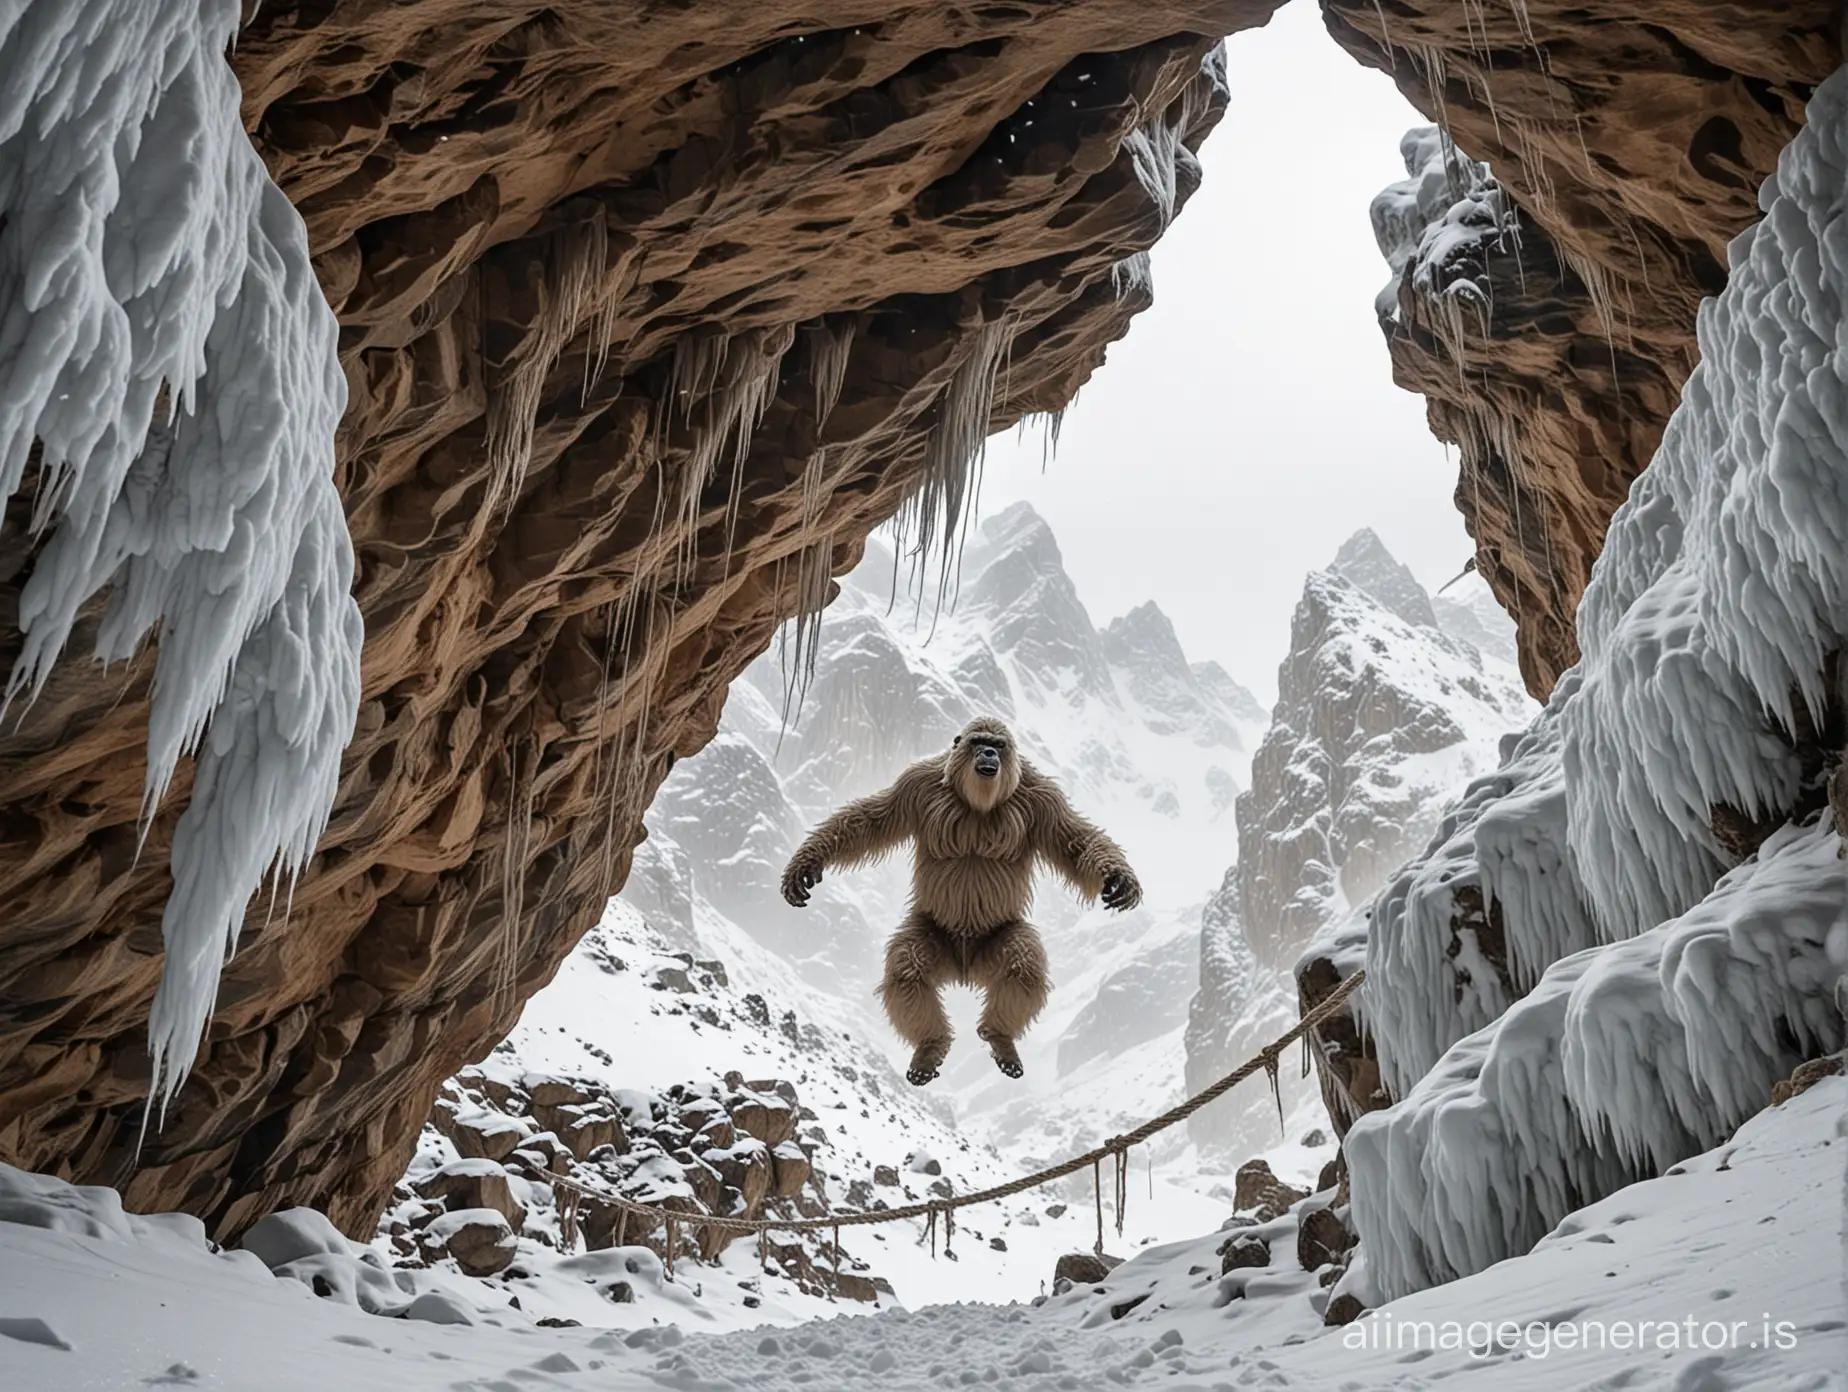 Majestic-Yeti-Emerges-from-Snowy-Cave-amidst-Rope-Bridges